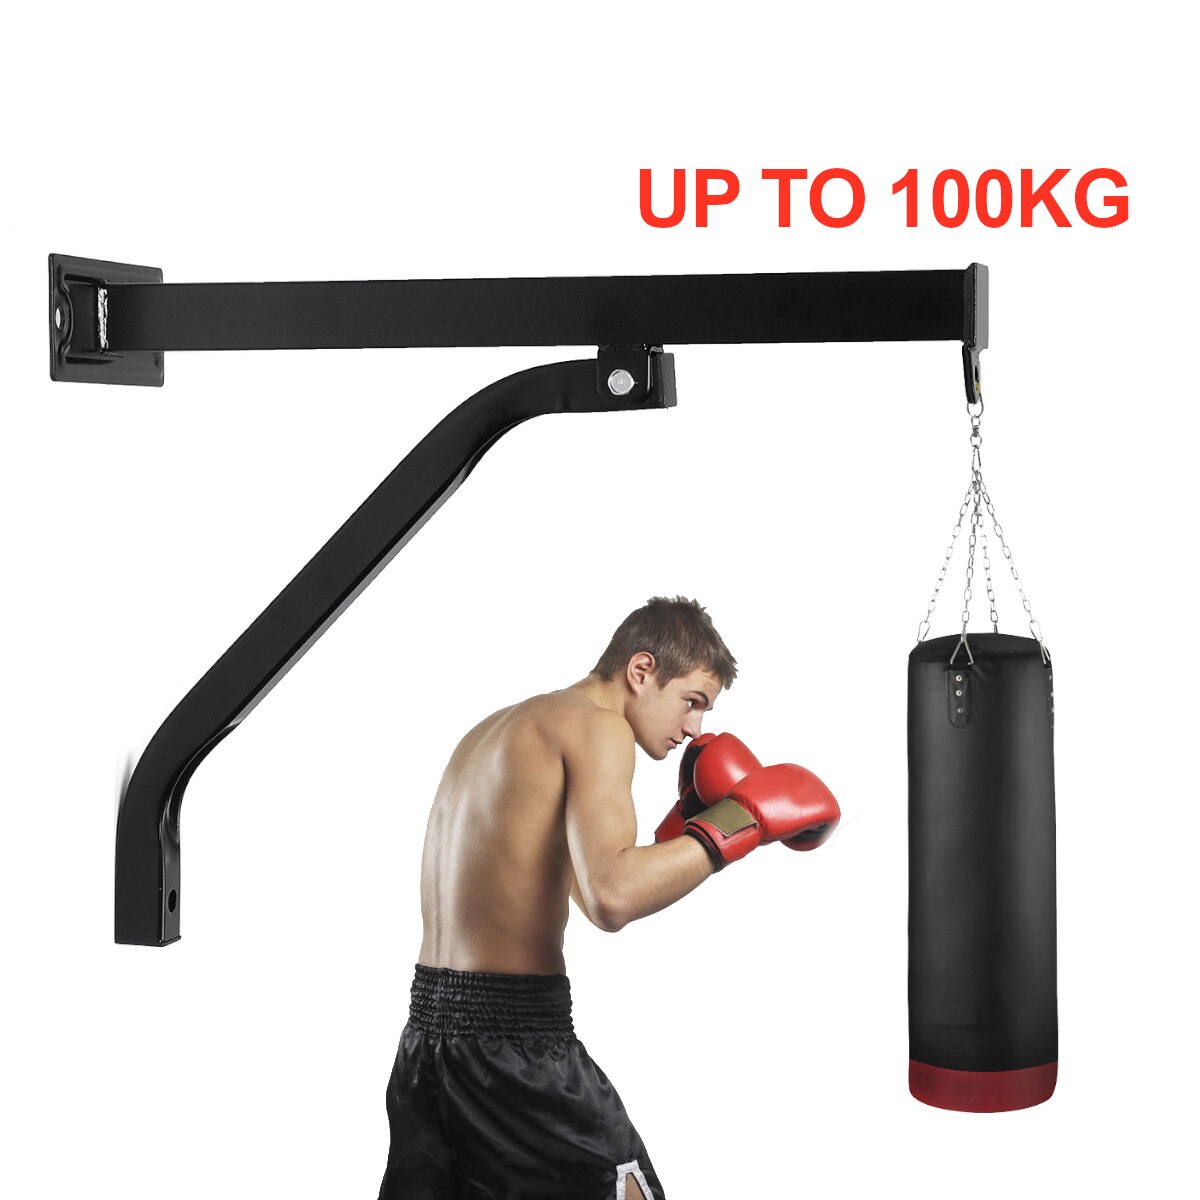 Heavy Duty Punching Bag Wall Bracket Metal Wall Mount Bracket Steel Mount Hanging Boxing Frame Stand Hanger for Fitness Training